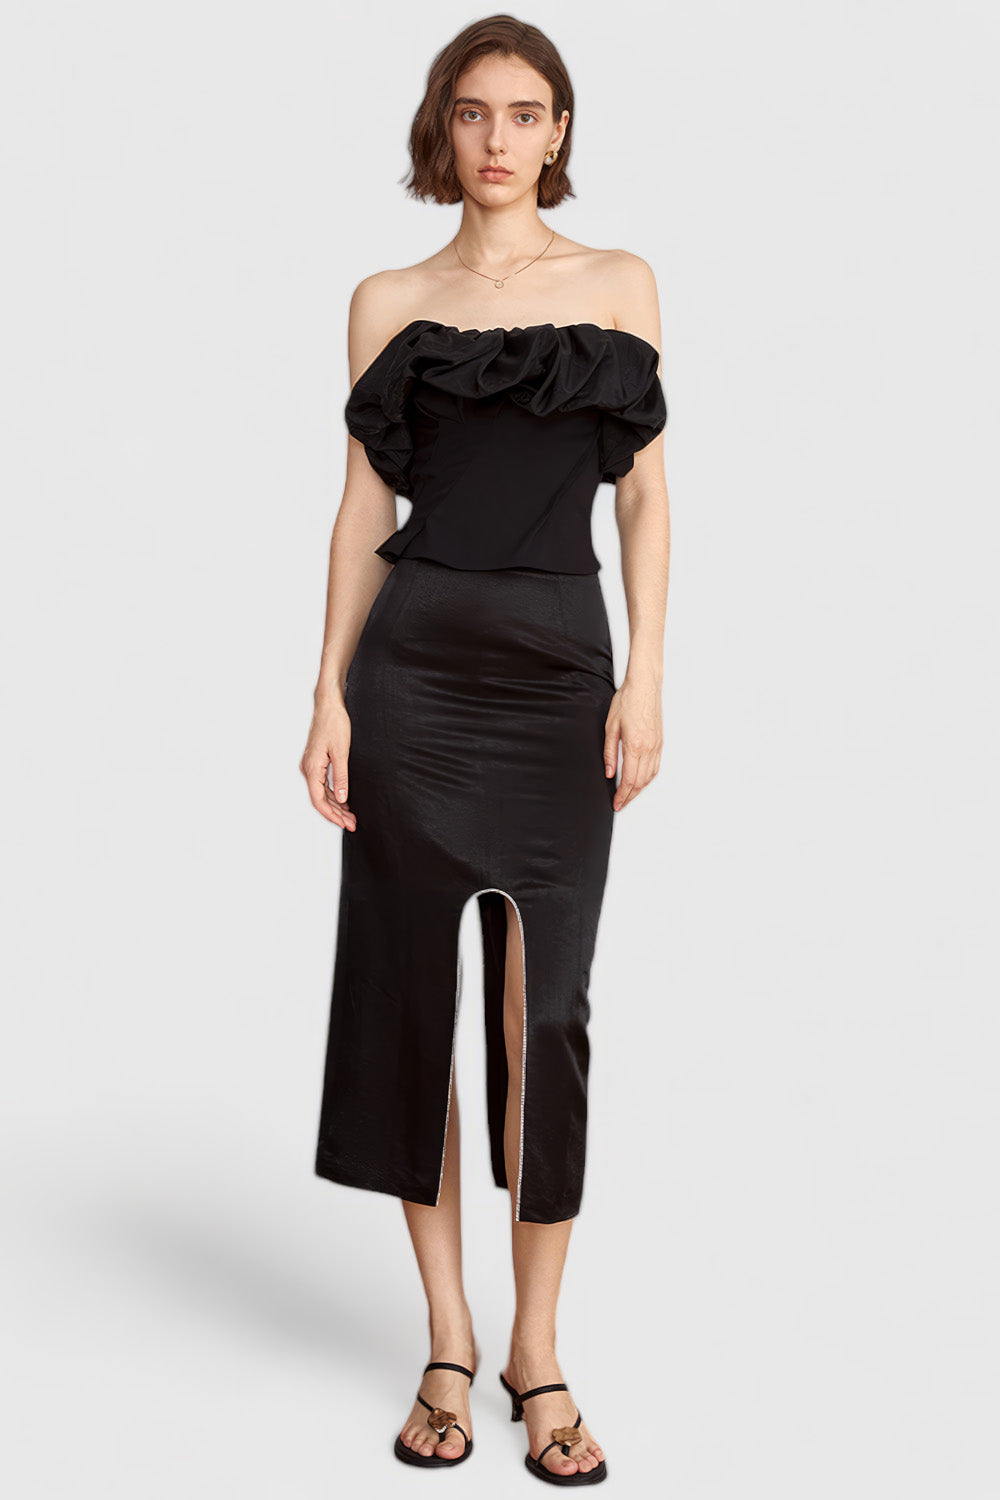 Strapless Top with Ruffle - Black